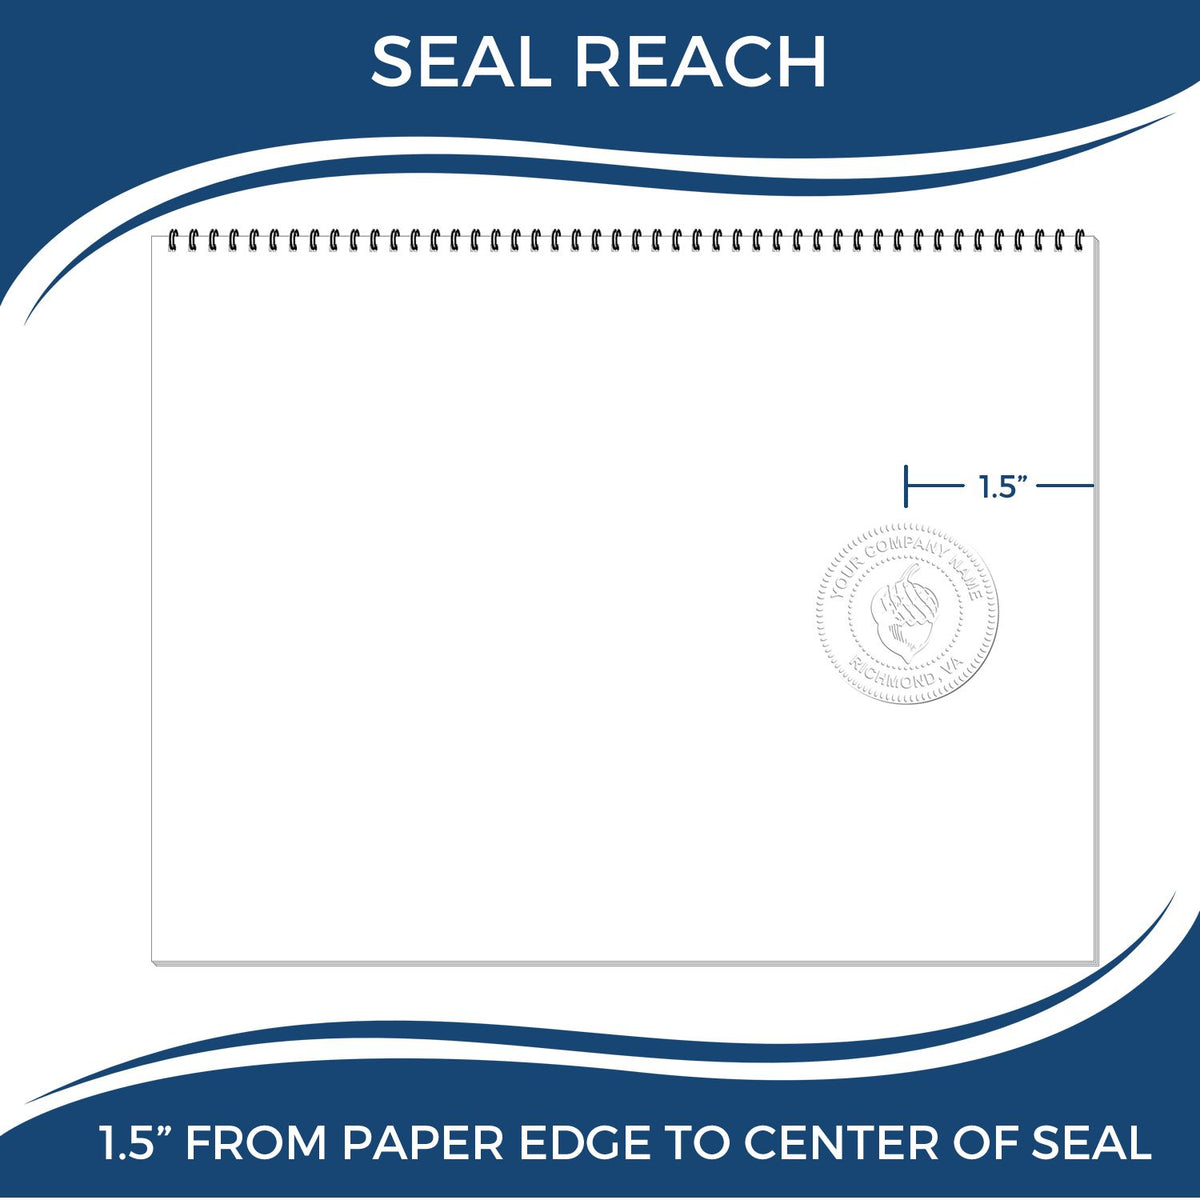 An infographic showing the seal reach which is represented by a ruler and a miniature seal image of the Gift Delaware Land Surveyor Seal